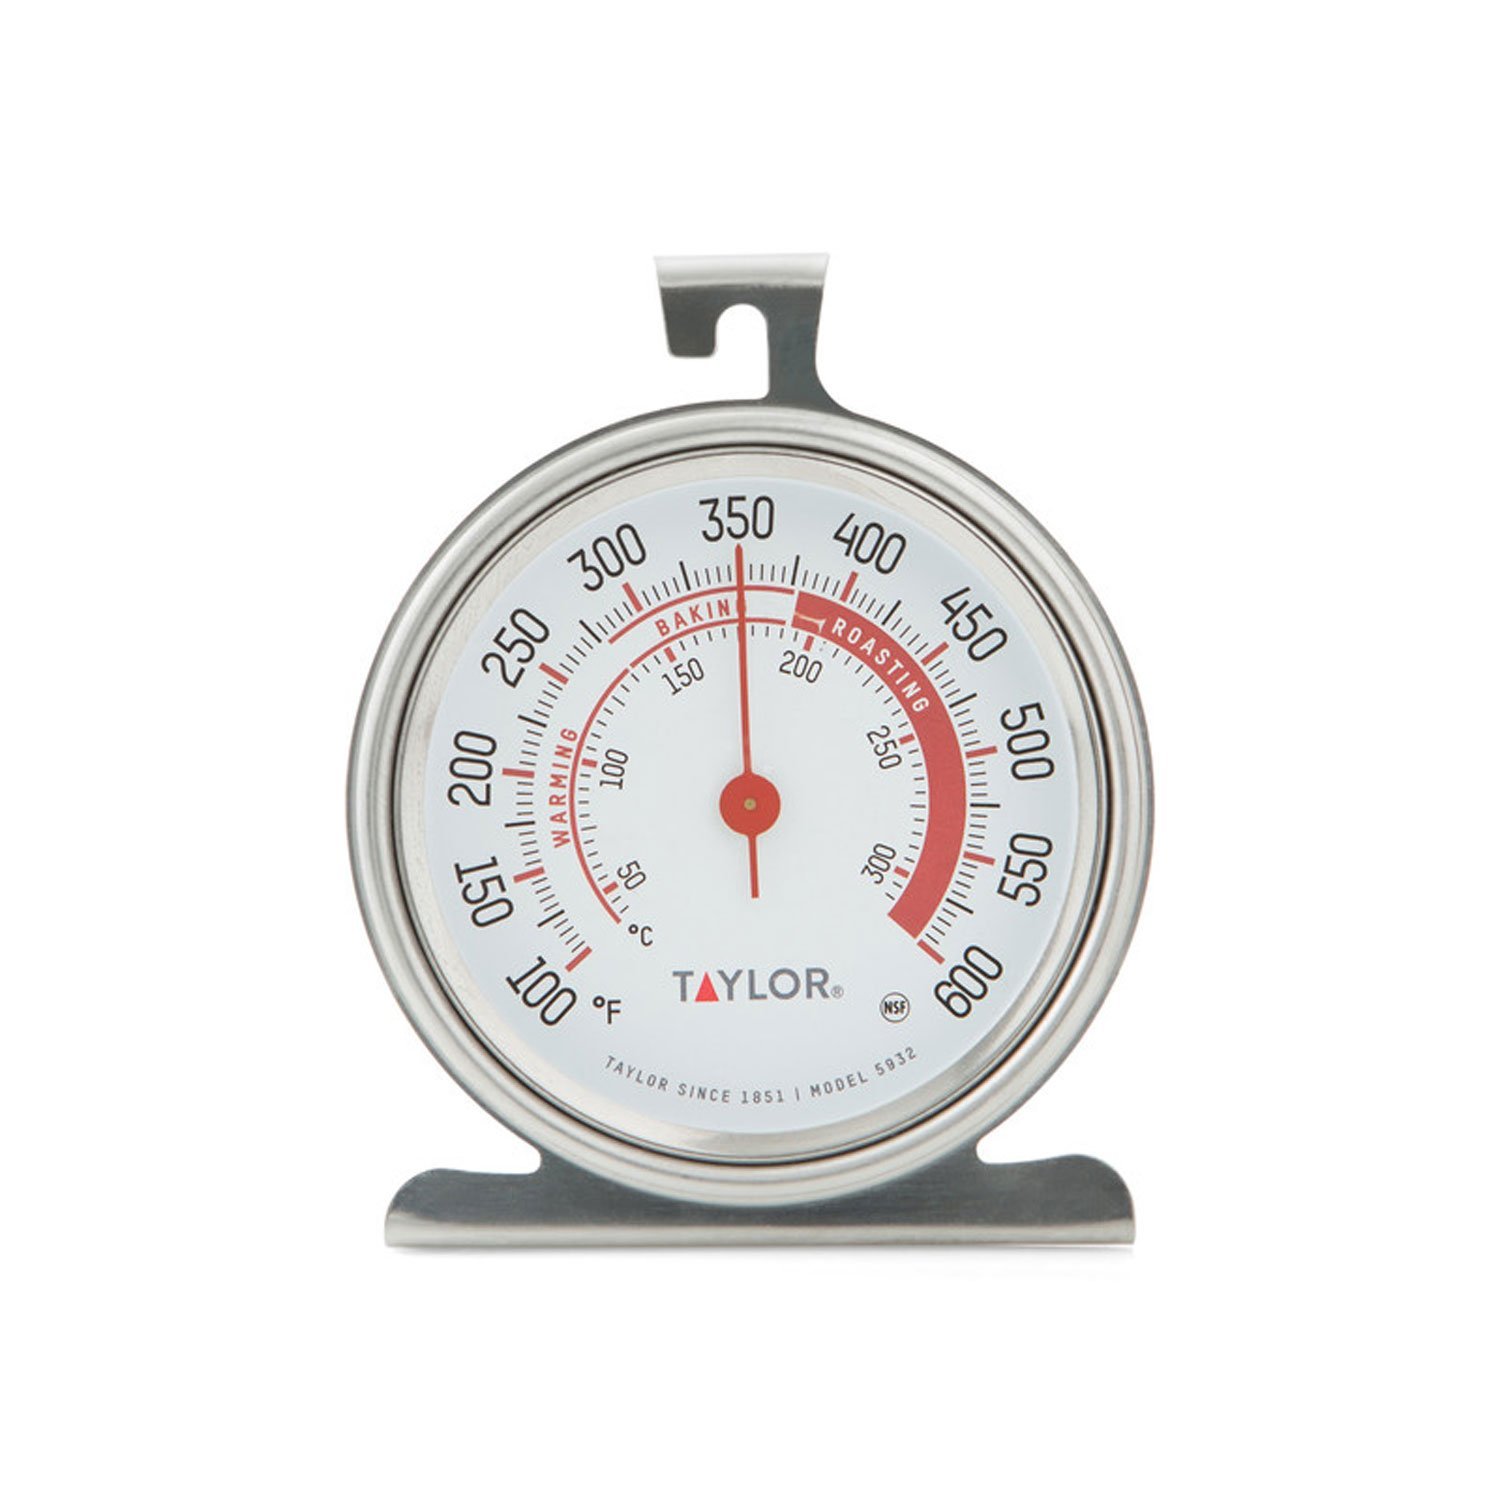 Taylor Classic Series Large Dial Oven Thermometer (6)